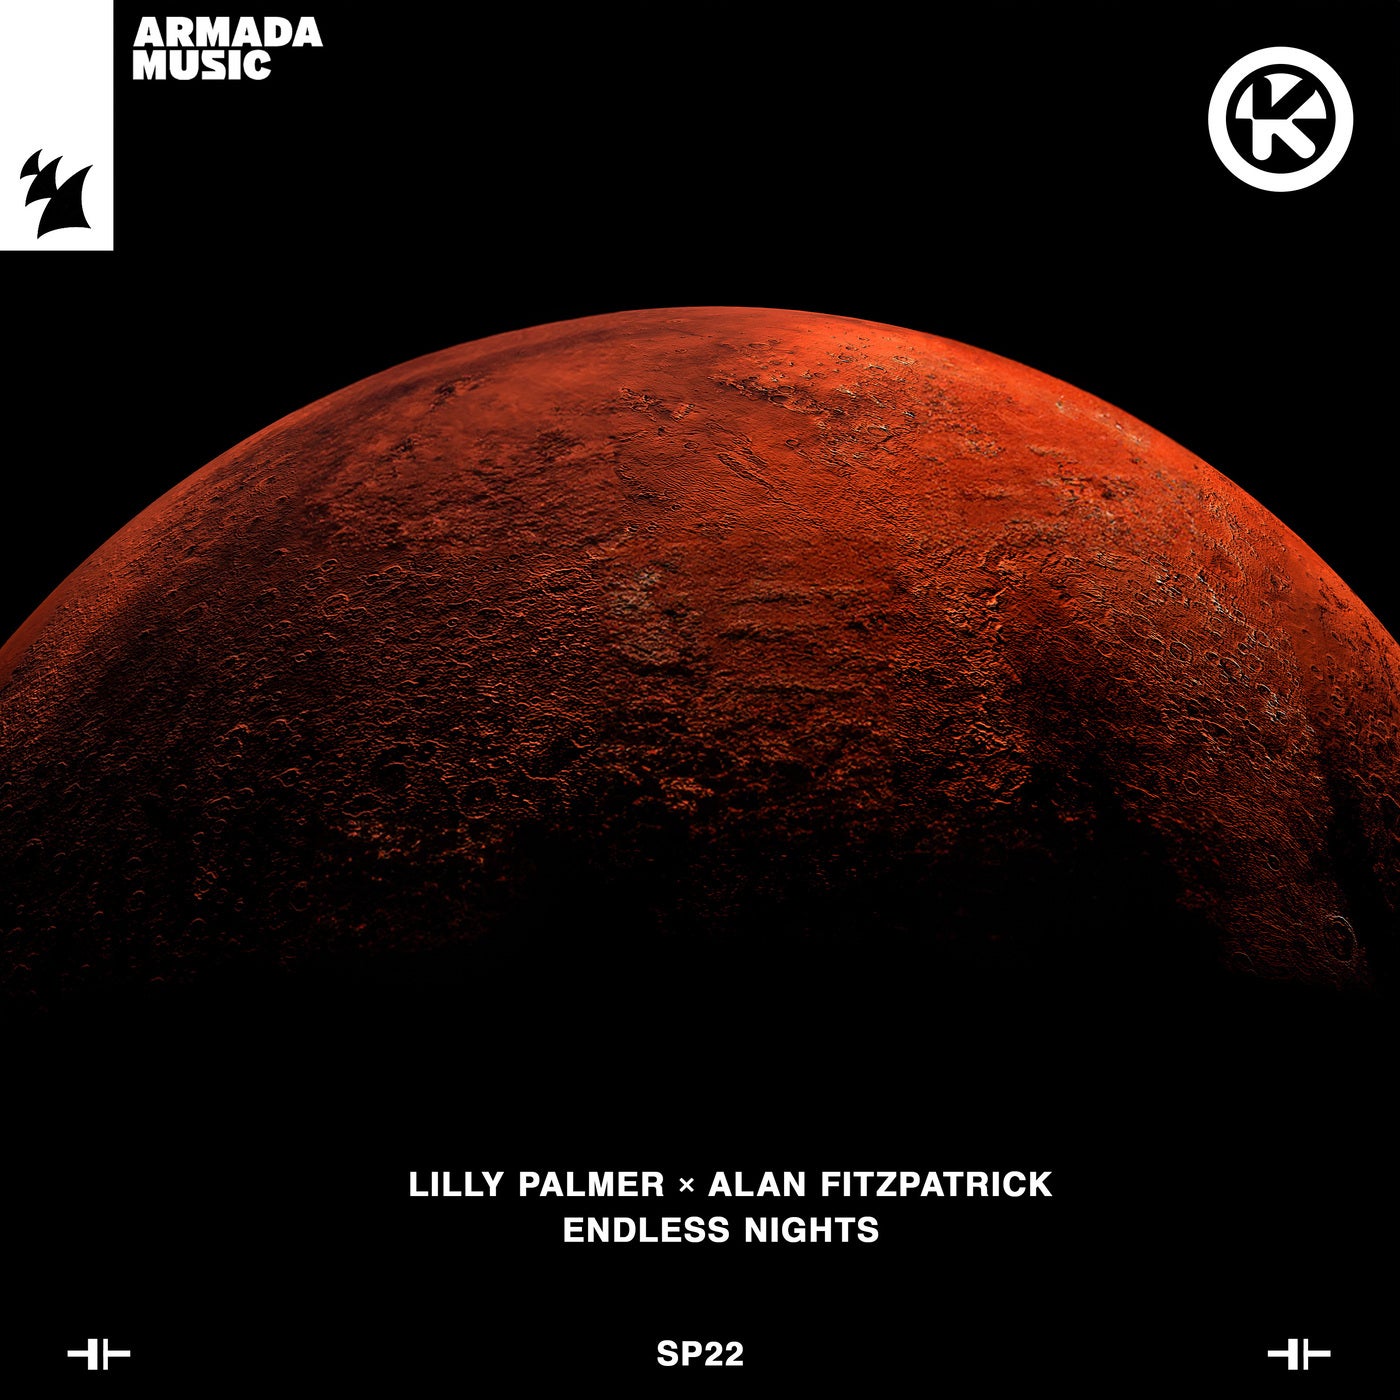 image cover: Alan Fitzpatrick, Lilly Palmer - Endless Nights on Armada Music